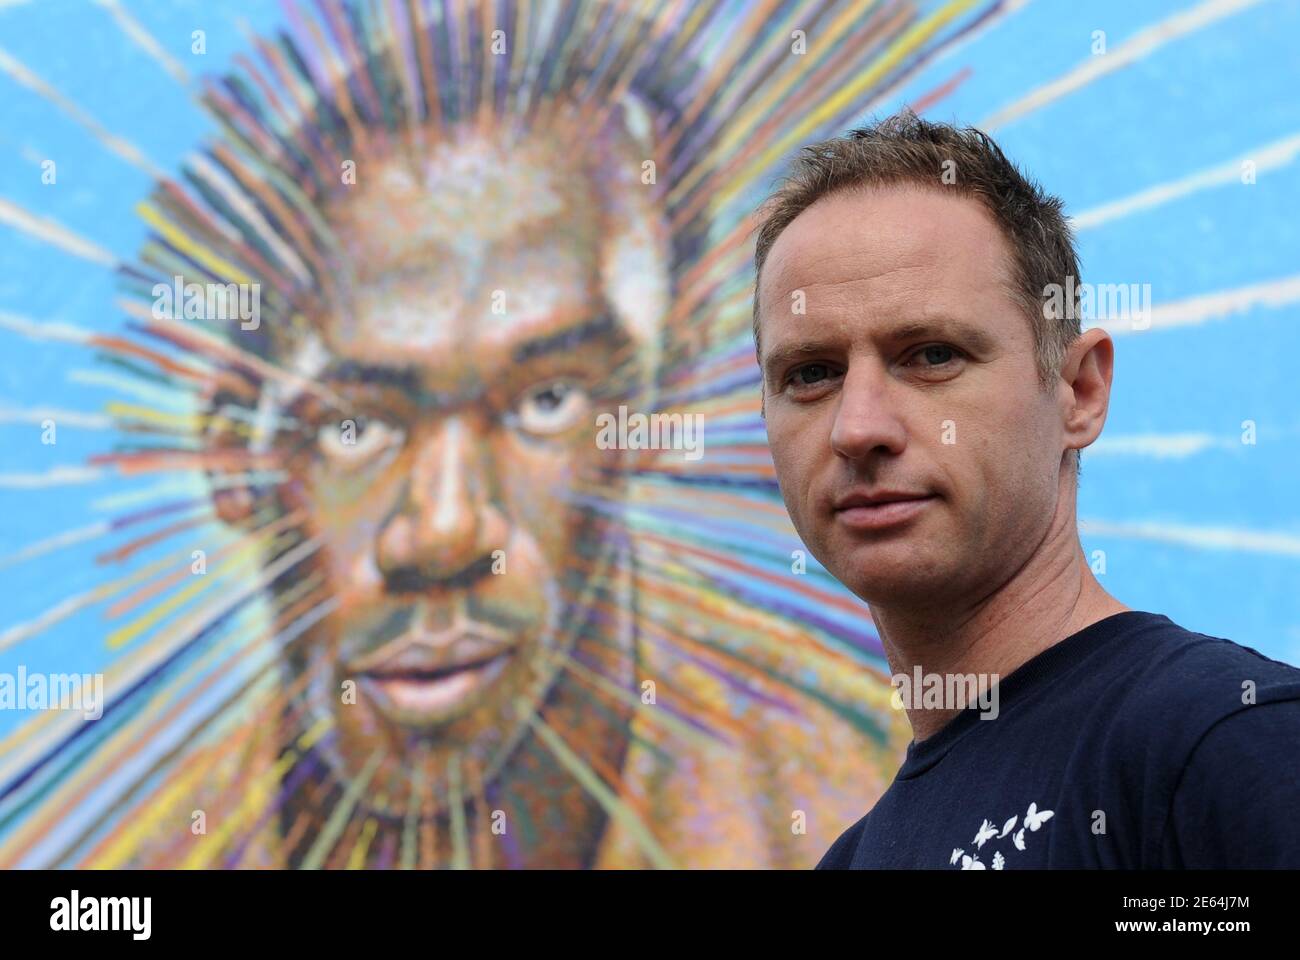 Street artist James Cochran, also known as Jimmy C, poses near his spray painted picture of Jamaican sprinter Usain Bolt in Sclater street car park in east London July 19, 2012. Cochran said this was done as an homage to the London 2012 Olympic Games, which begin July 27. REUTERS/Paul Hackett  (BRITAIN - Tags: SPORT OLYMPICS ATHLETICS ENTERTAINMENT) Stock Photo